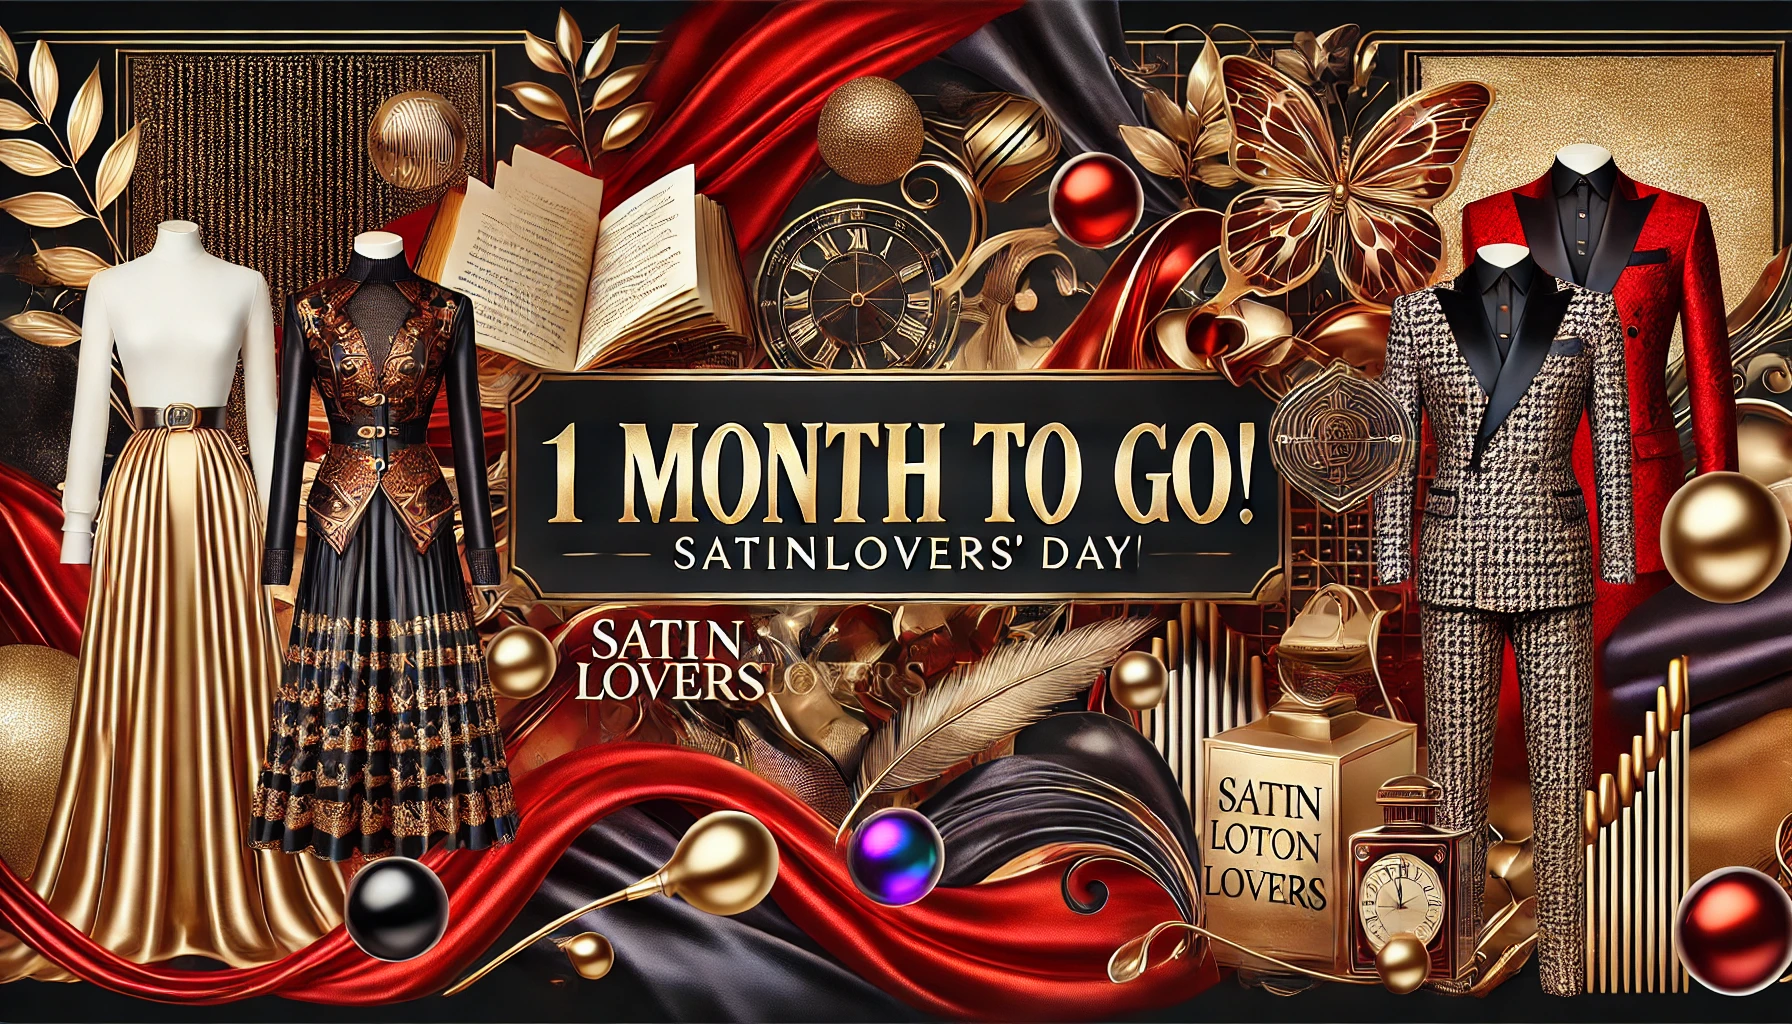 SatinLovers’ Day: One Month Countdown Begins!